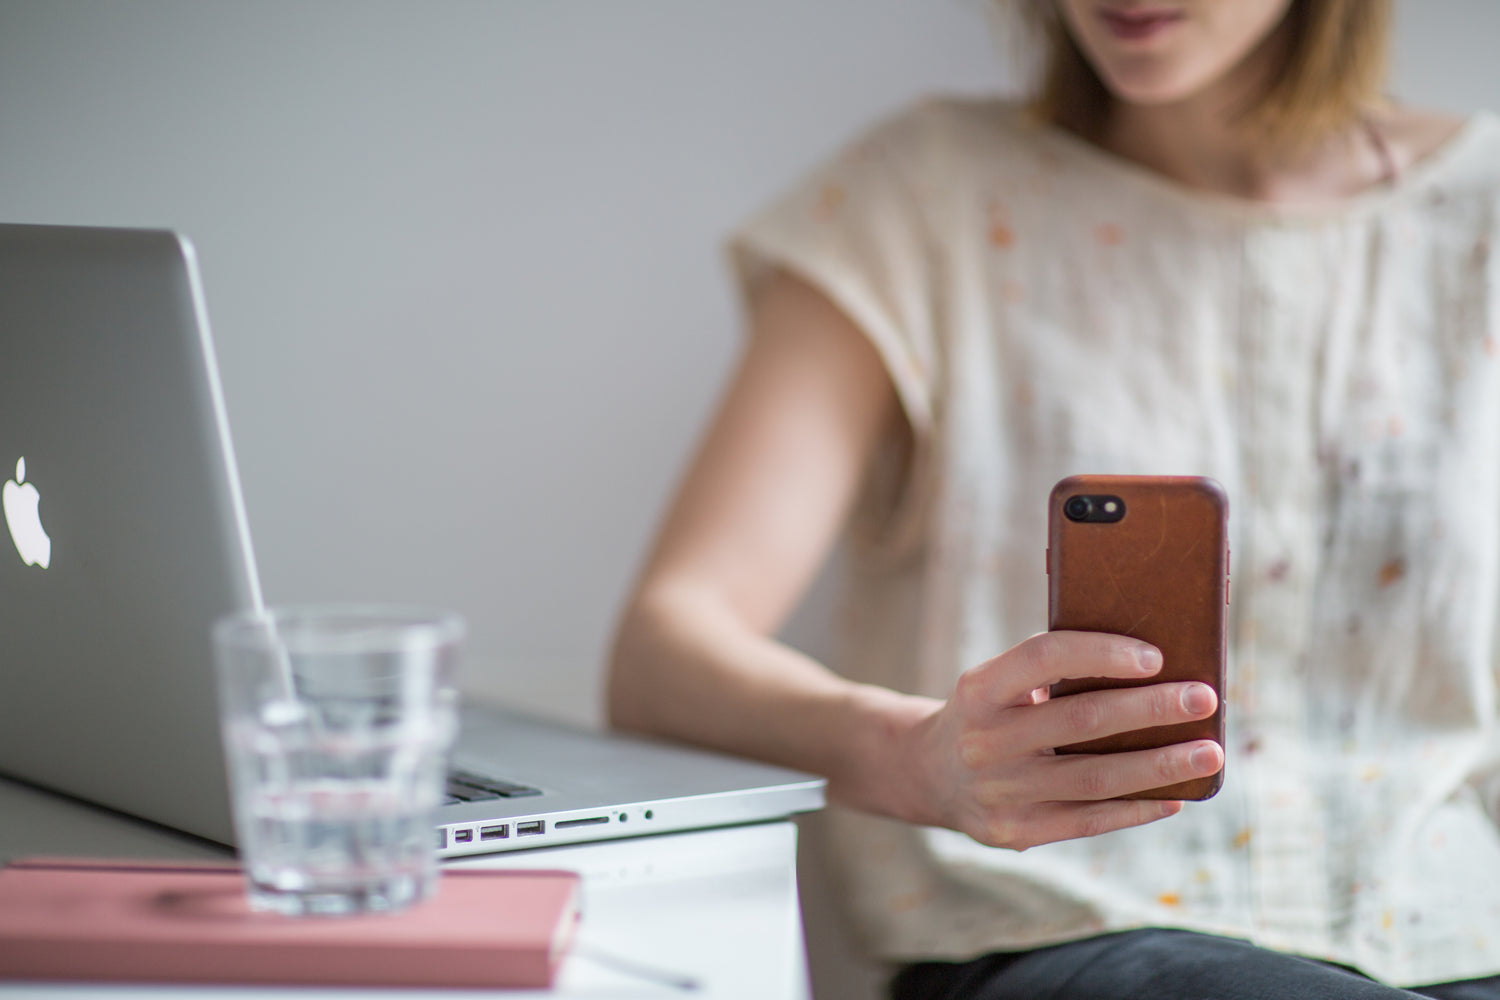 Photo of person holding a mobile phone next to an Apple Macbook on a table.